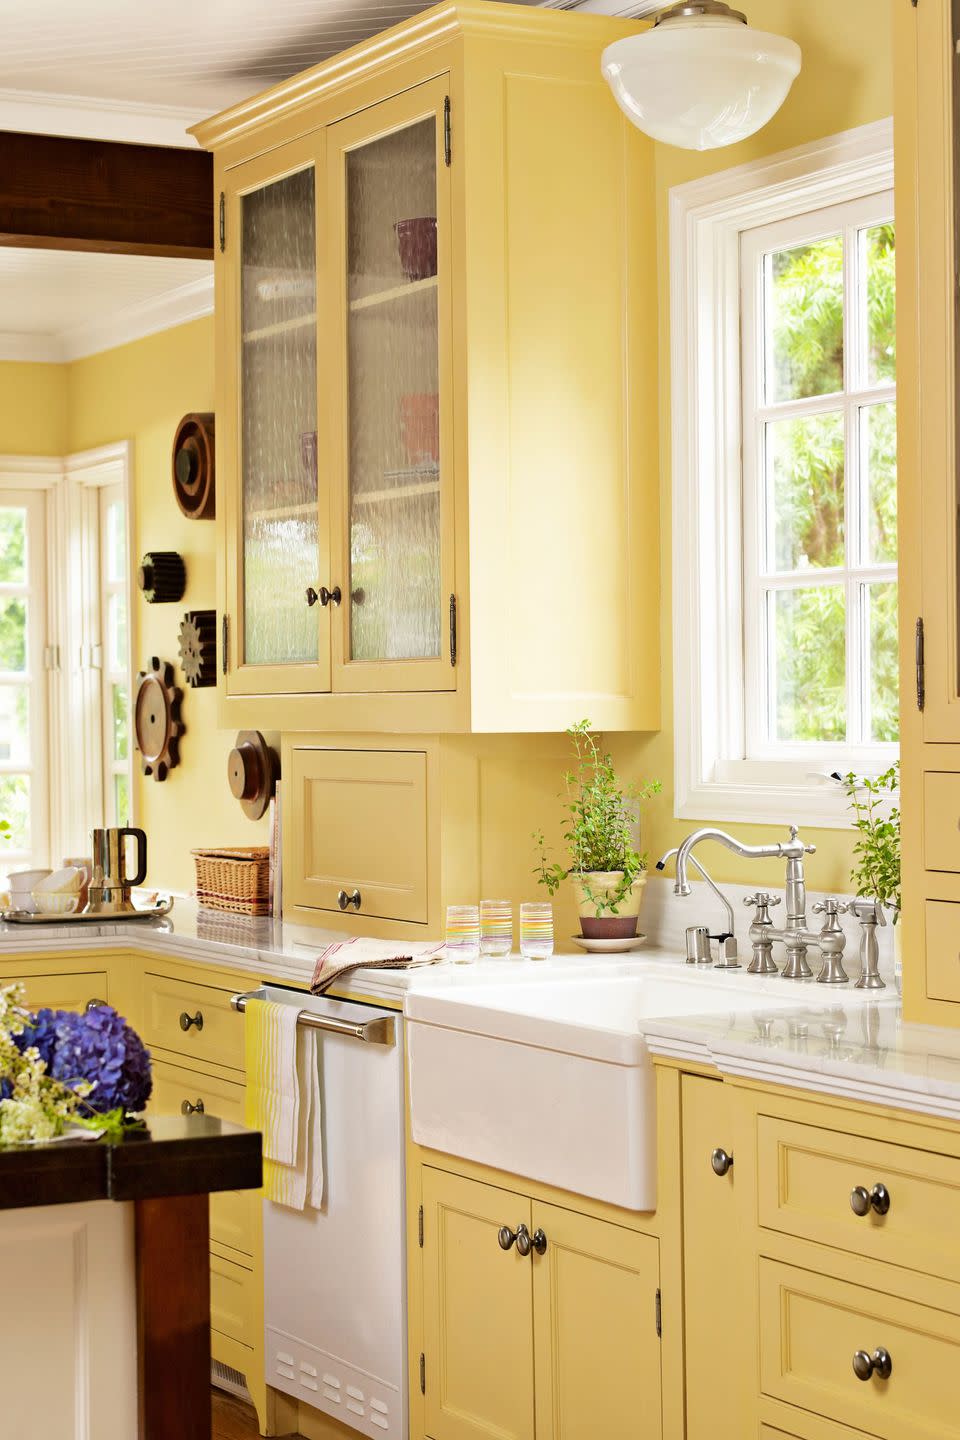 farmhouse kitchen with bright yellow cabinets, walls, and breakfast nook